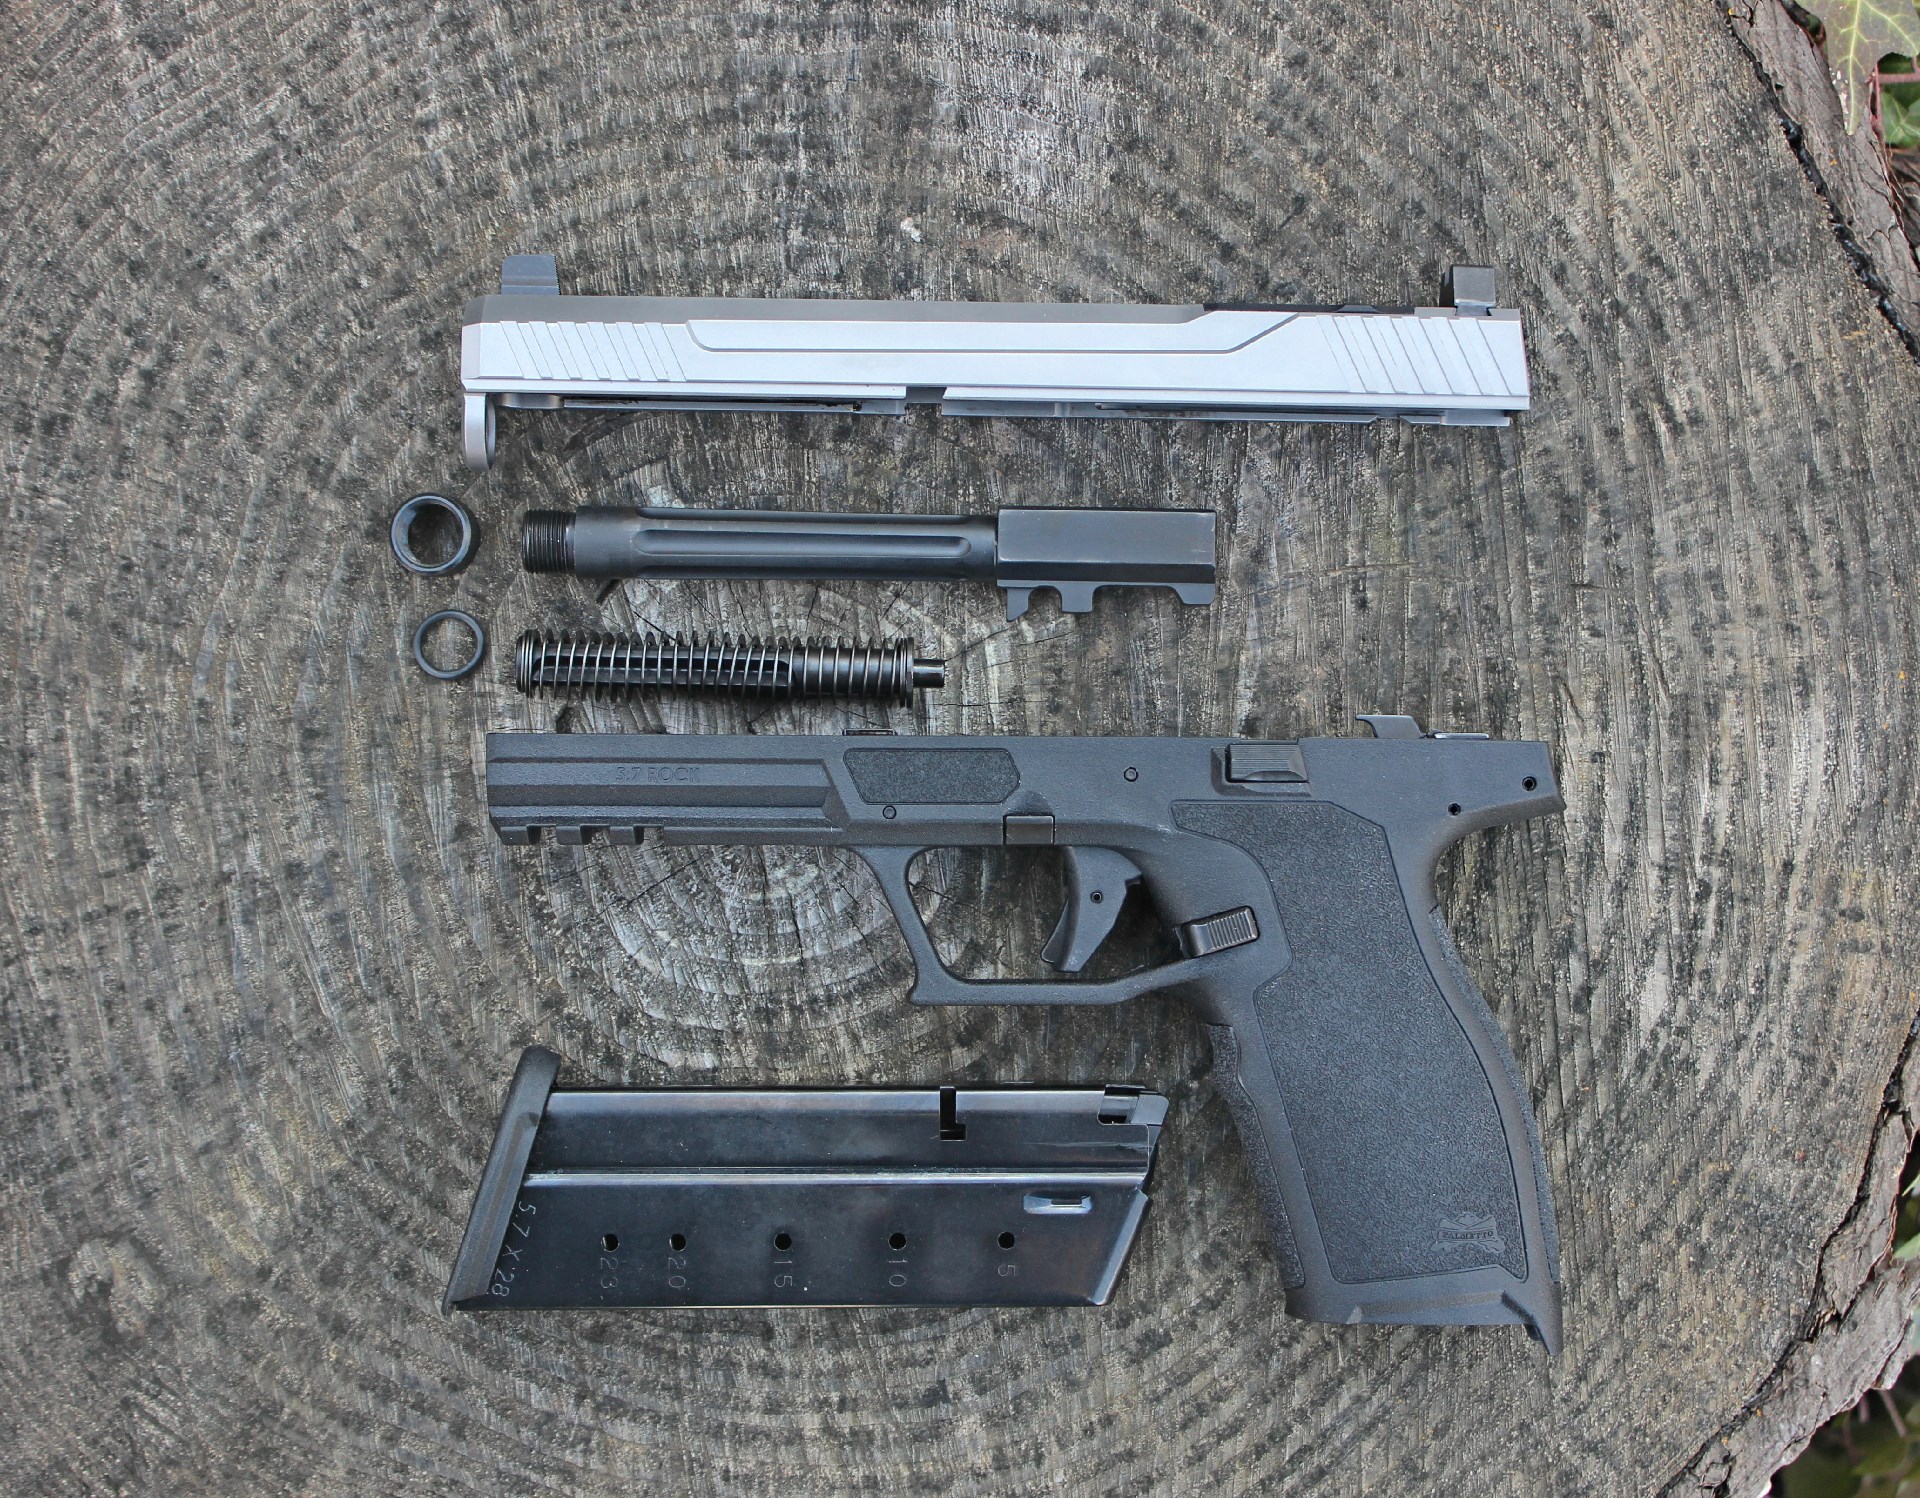 Palmetto State Armory 5.7 Rock Rk1 pistol disassembled parts shown on log